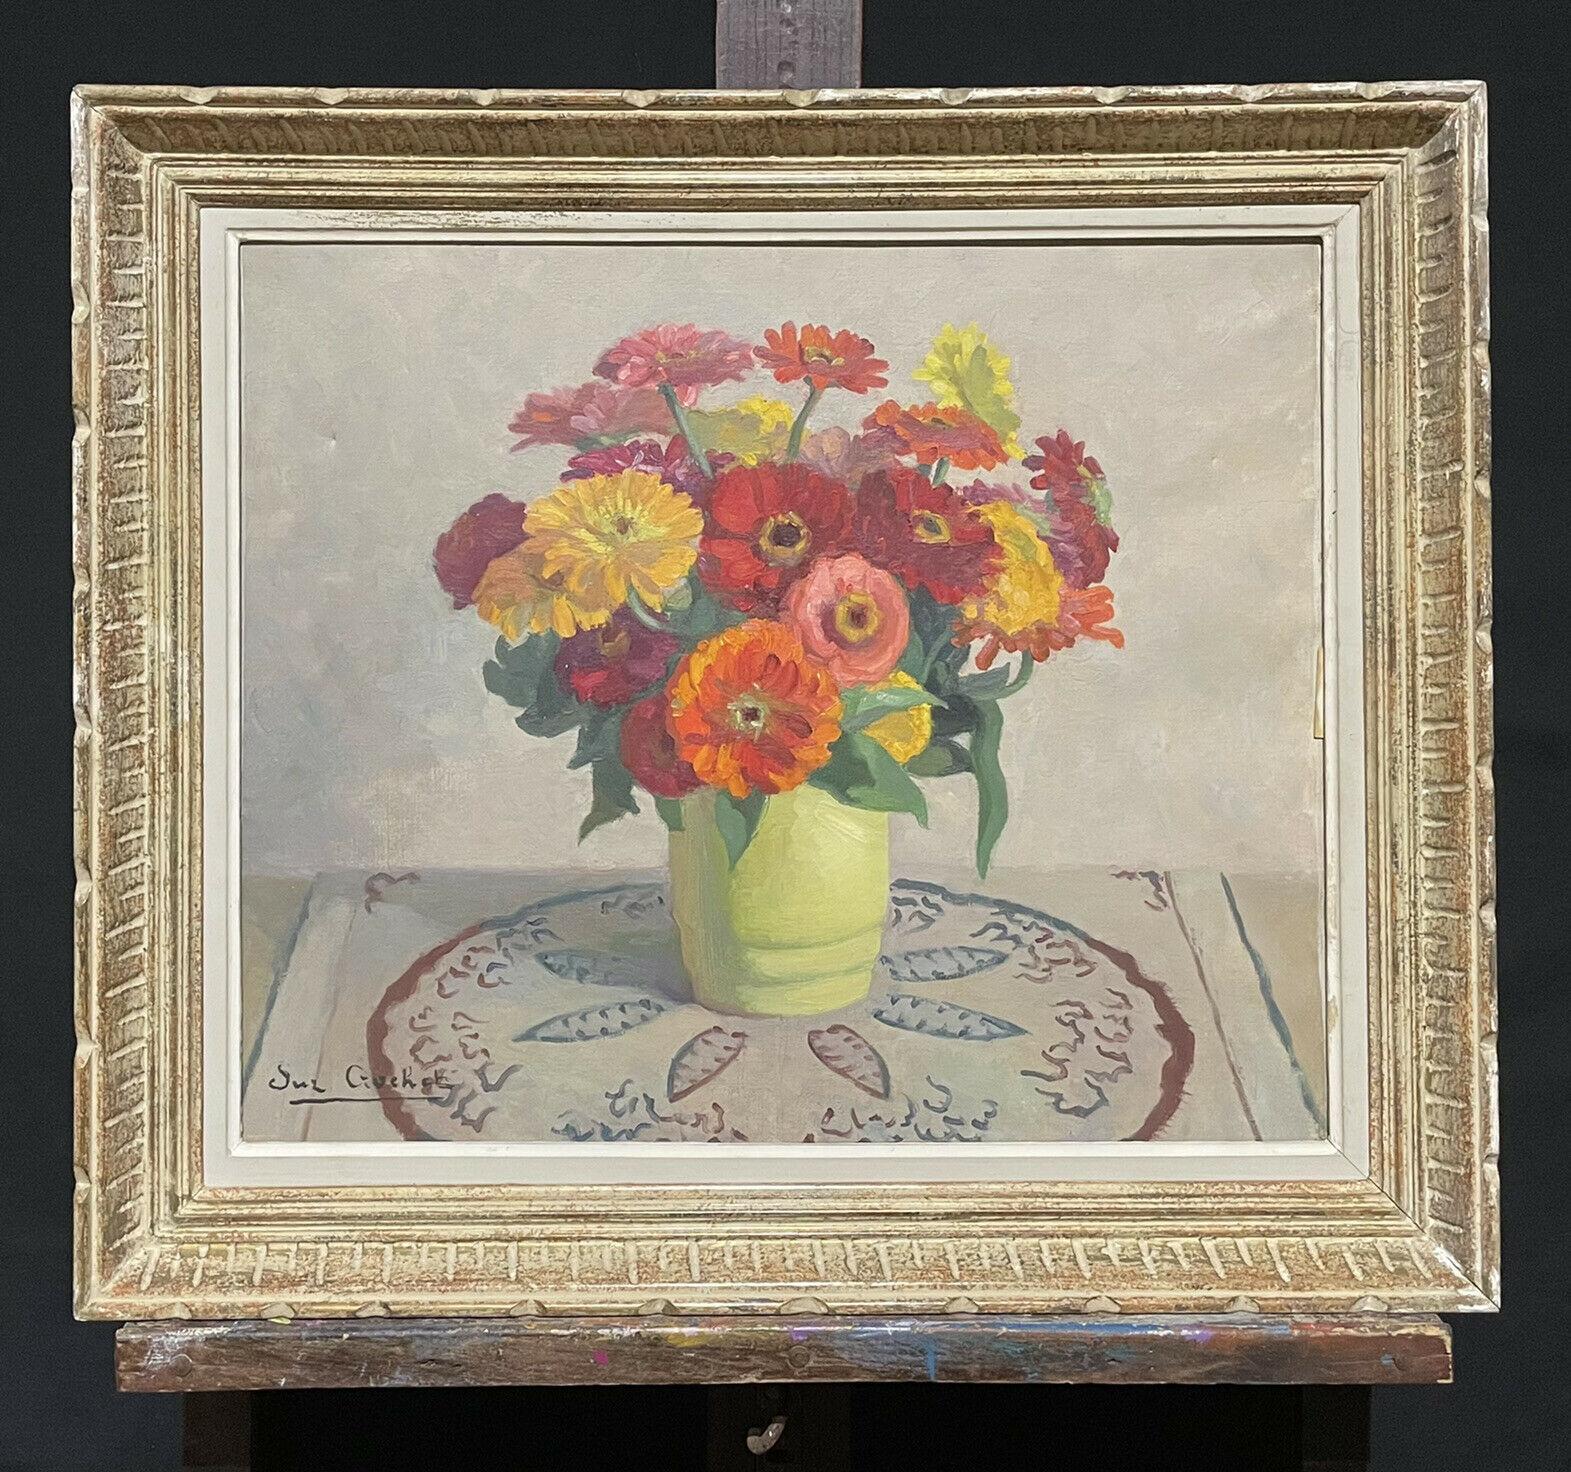 Unknown Still-Life Painting - 1930's FRENCH SIGNED VINTAGE OIL PAINTING - FLOWERS IN YELLOW VASE INTERIOR